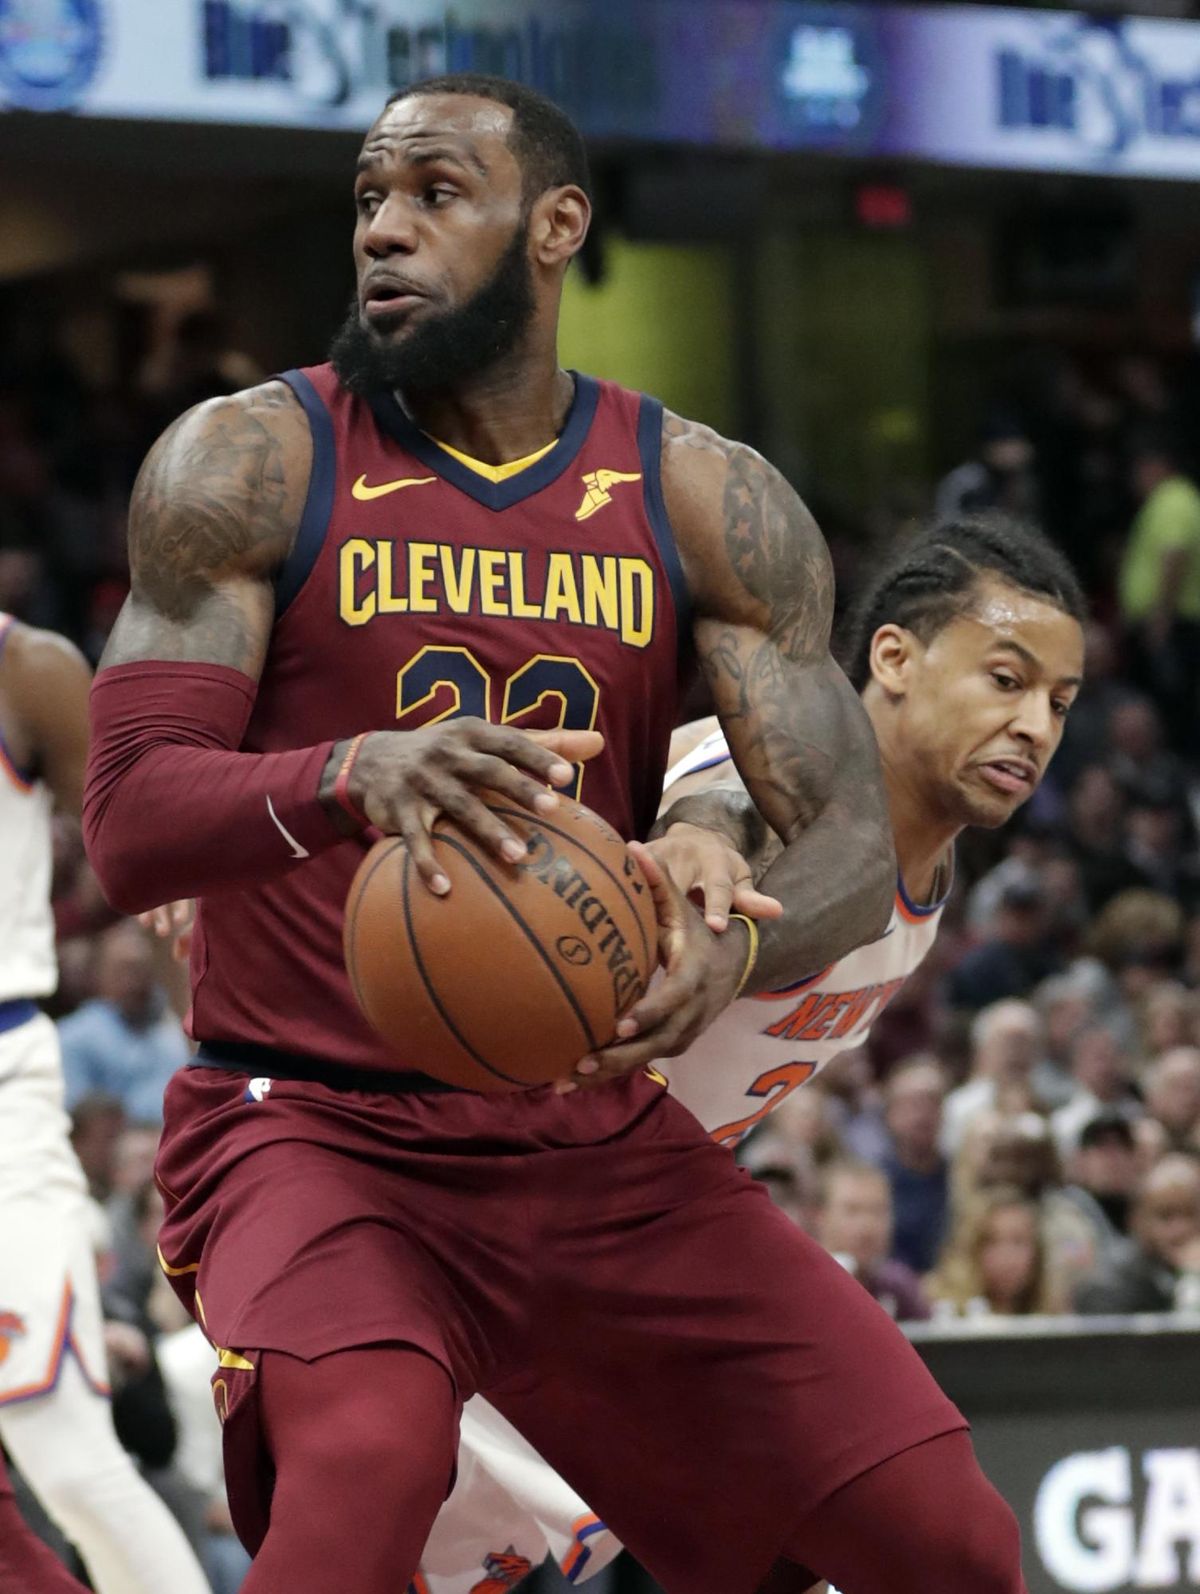 Cleveland Cavaliers’ LeBron James, left, drives past New York Knicks’ Trey Burke in the first half of an NBA basketball game, Wednesday, April 11, 2018, in Cleveland. (Tony Dejak / Associated Press)